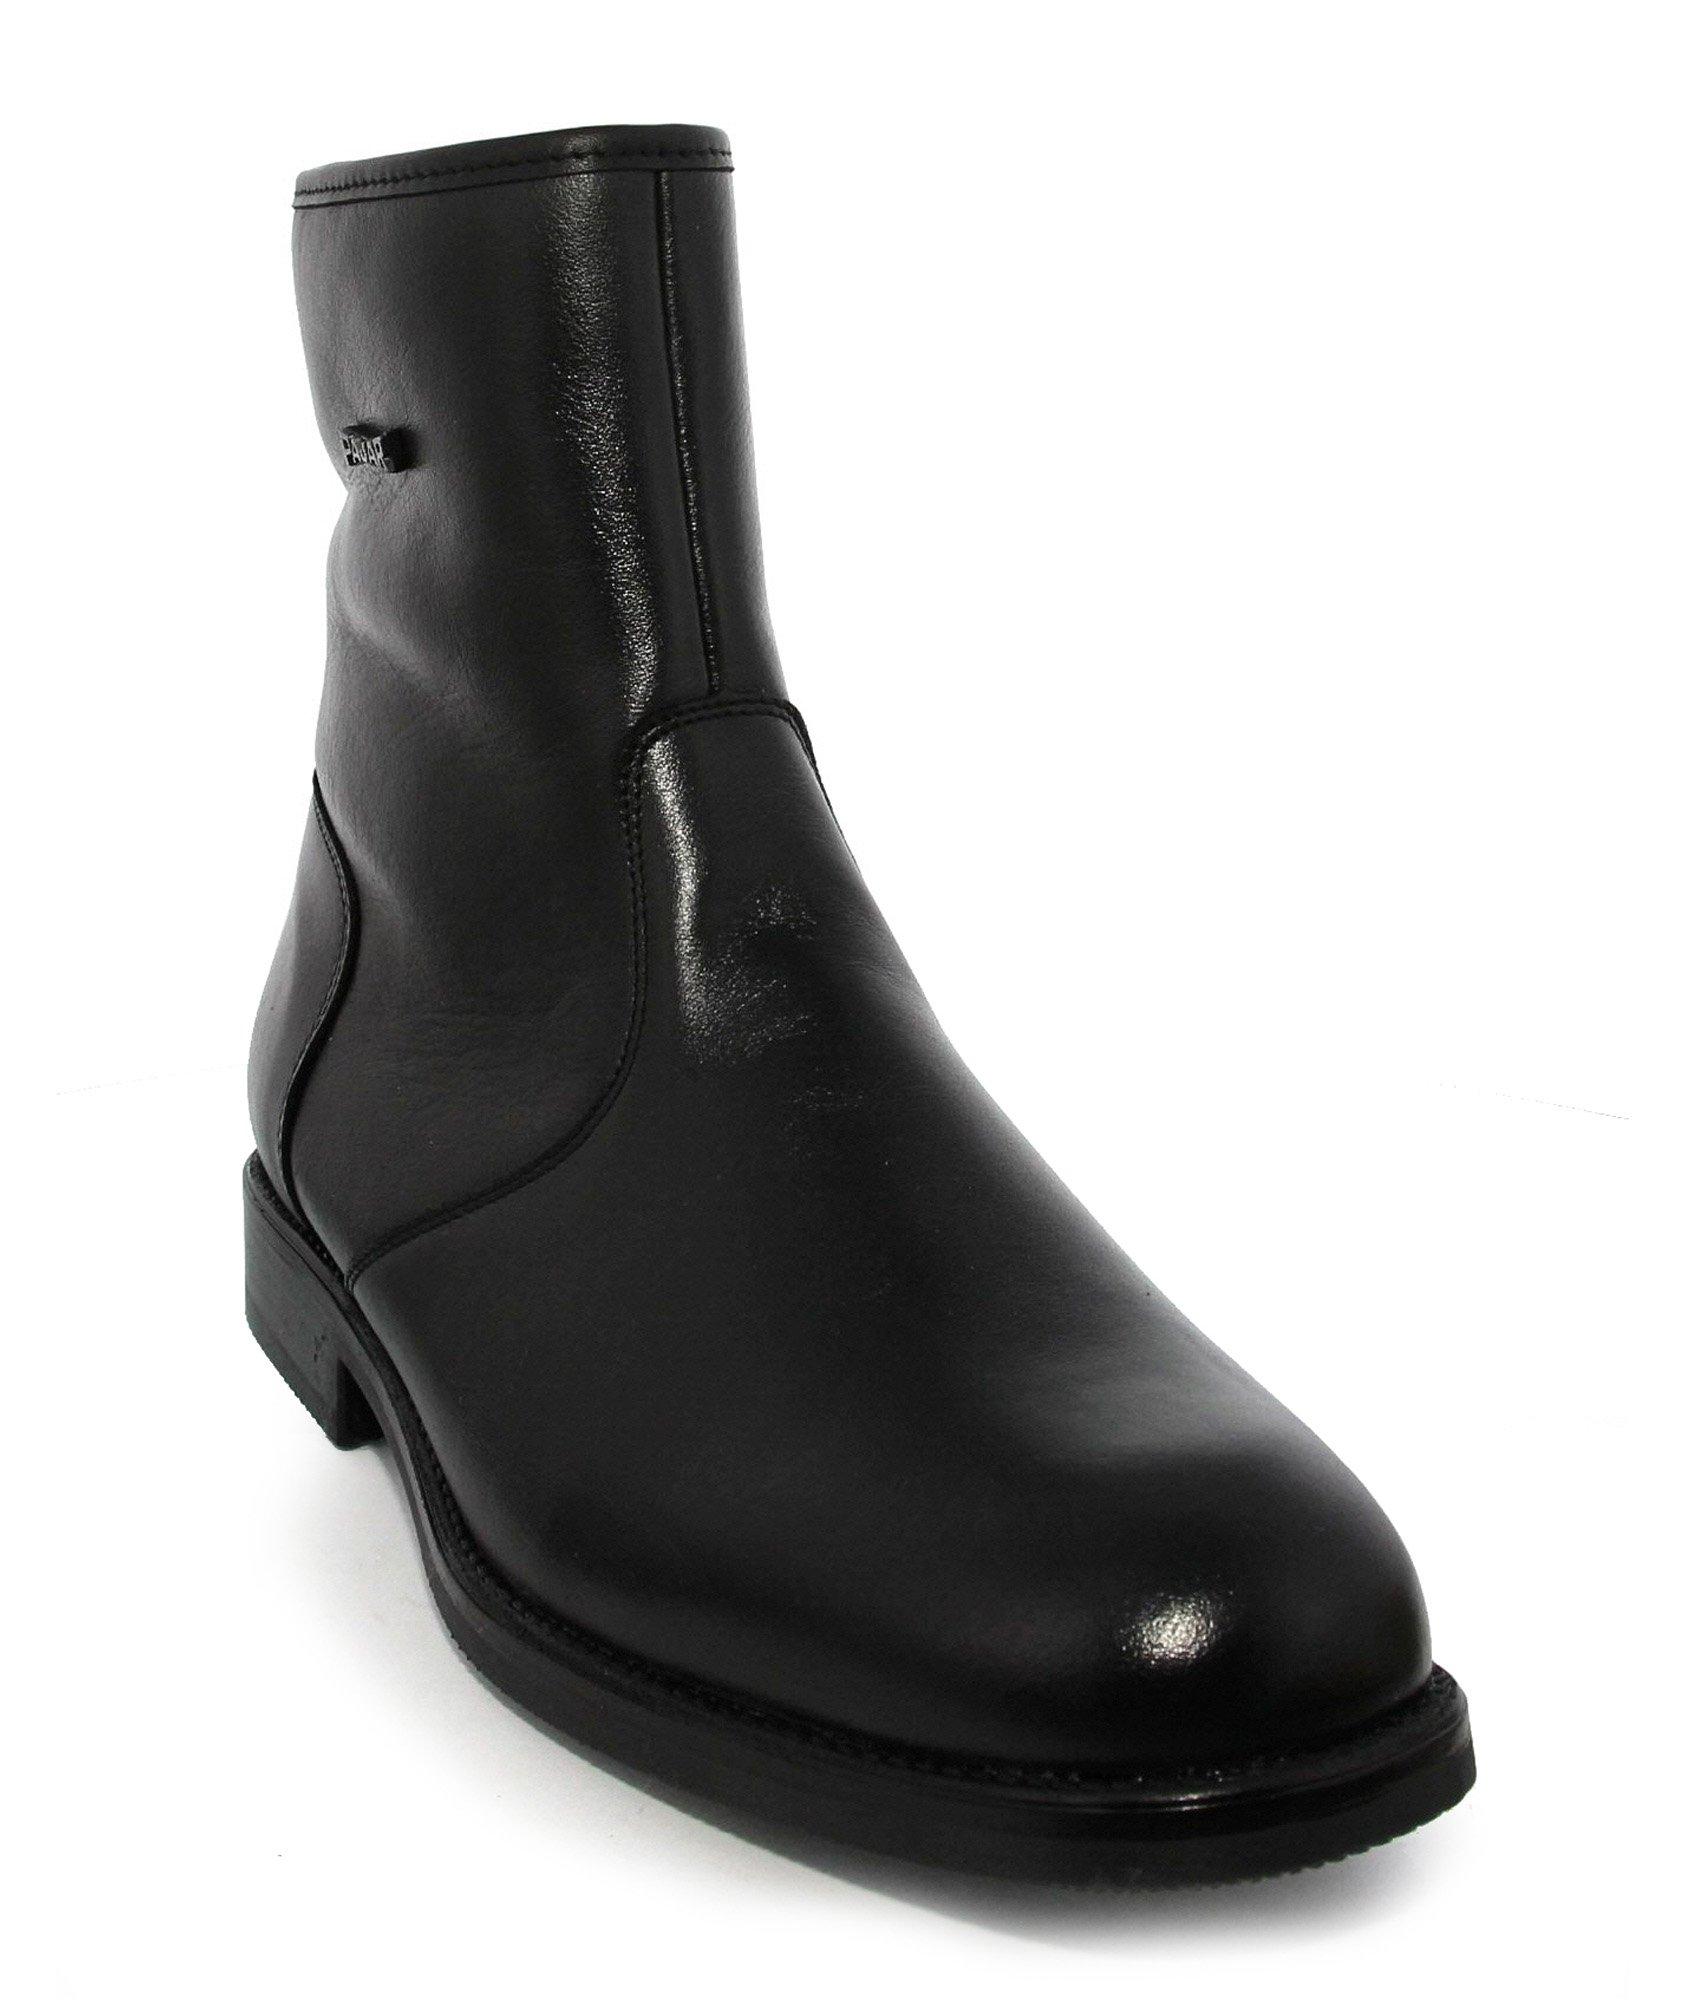 Ben Waterproof Shearling-Lined Boots image 0